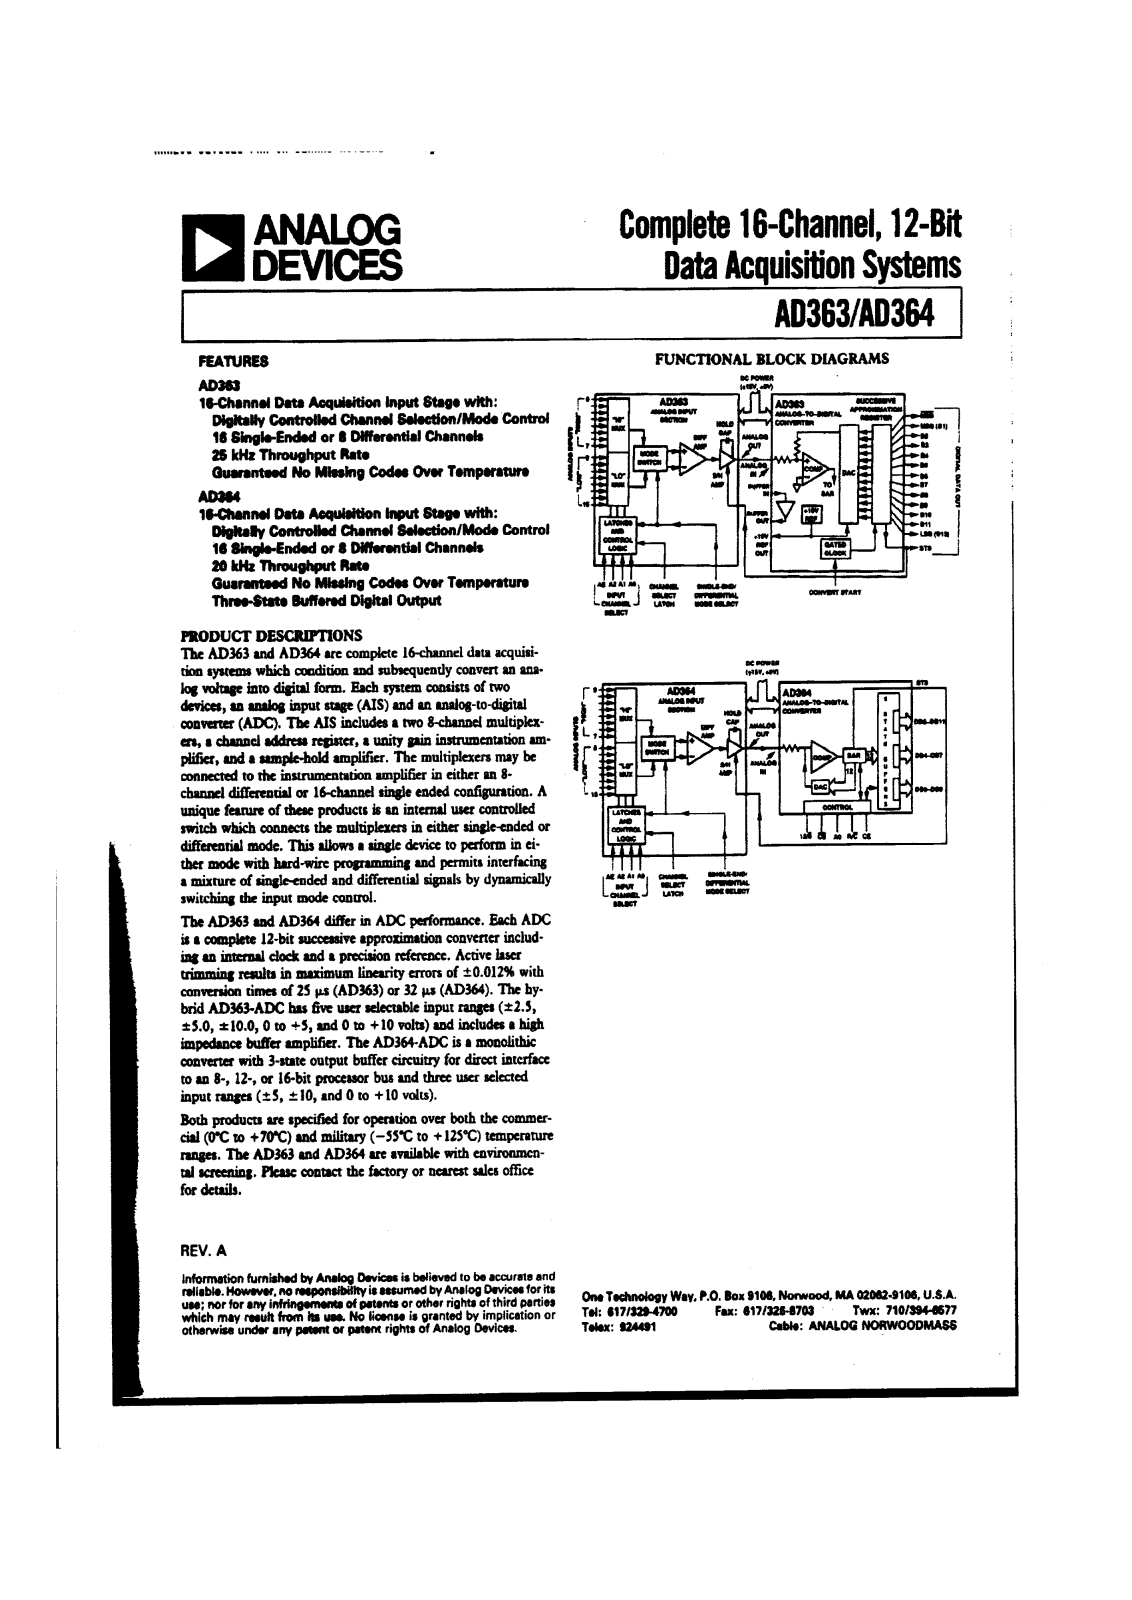 Analog Devices AD364RKD, AD364RJD, AD363RSD, AD363RKD, AD363RJD Datasheet